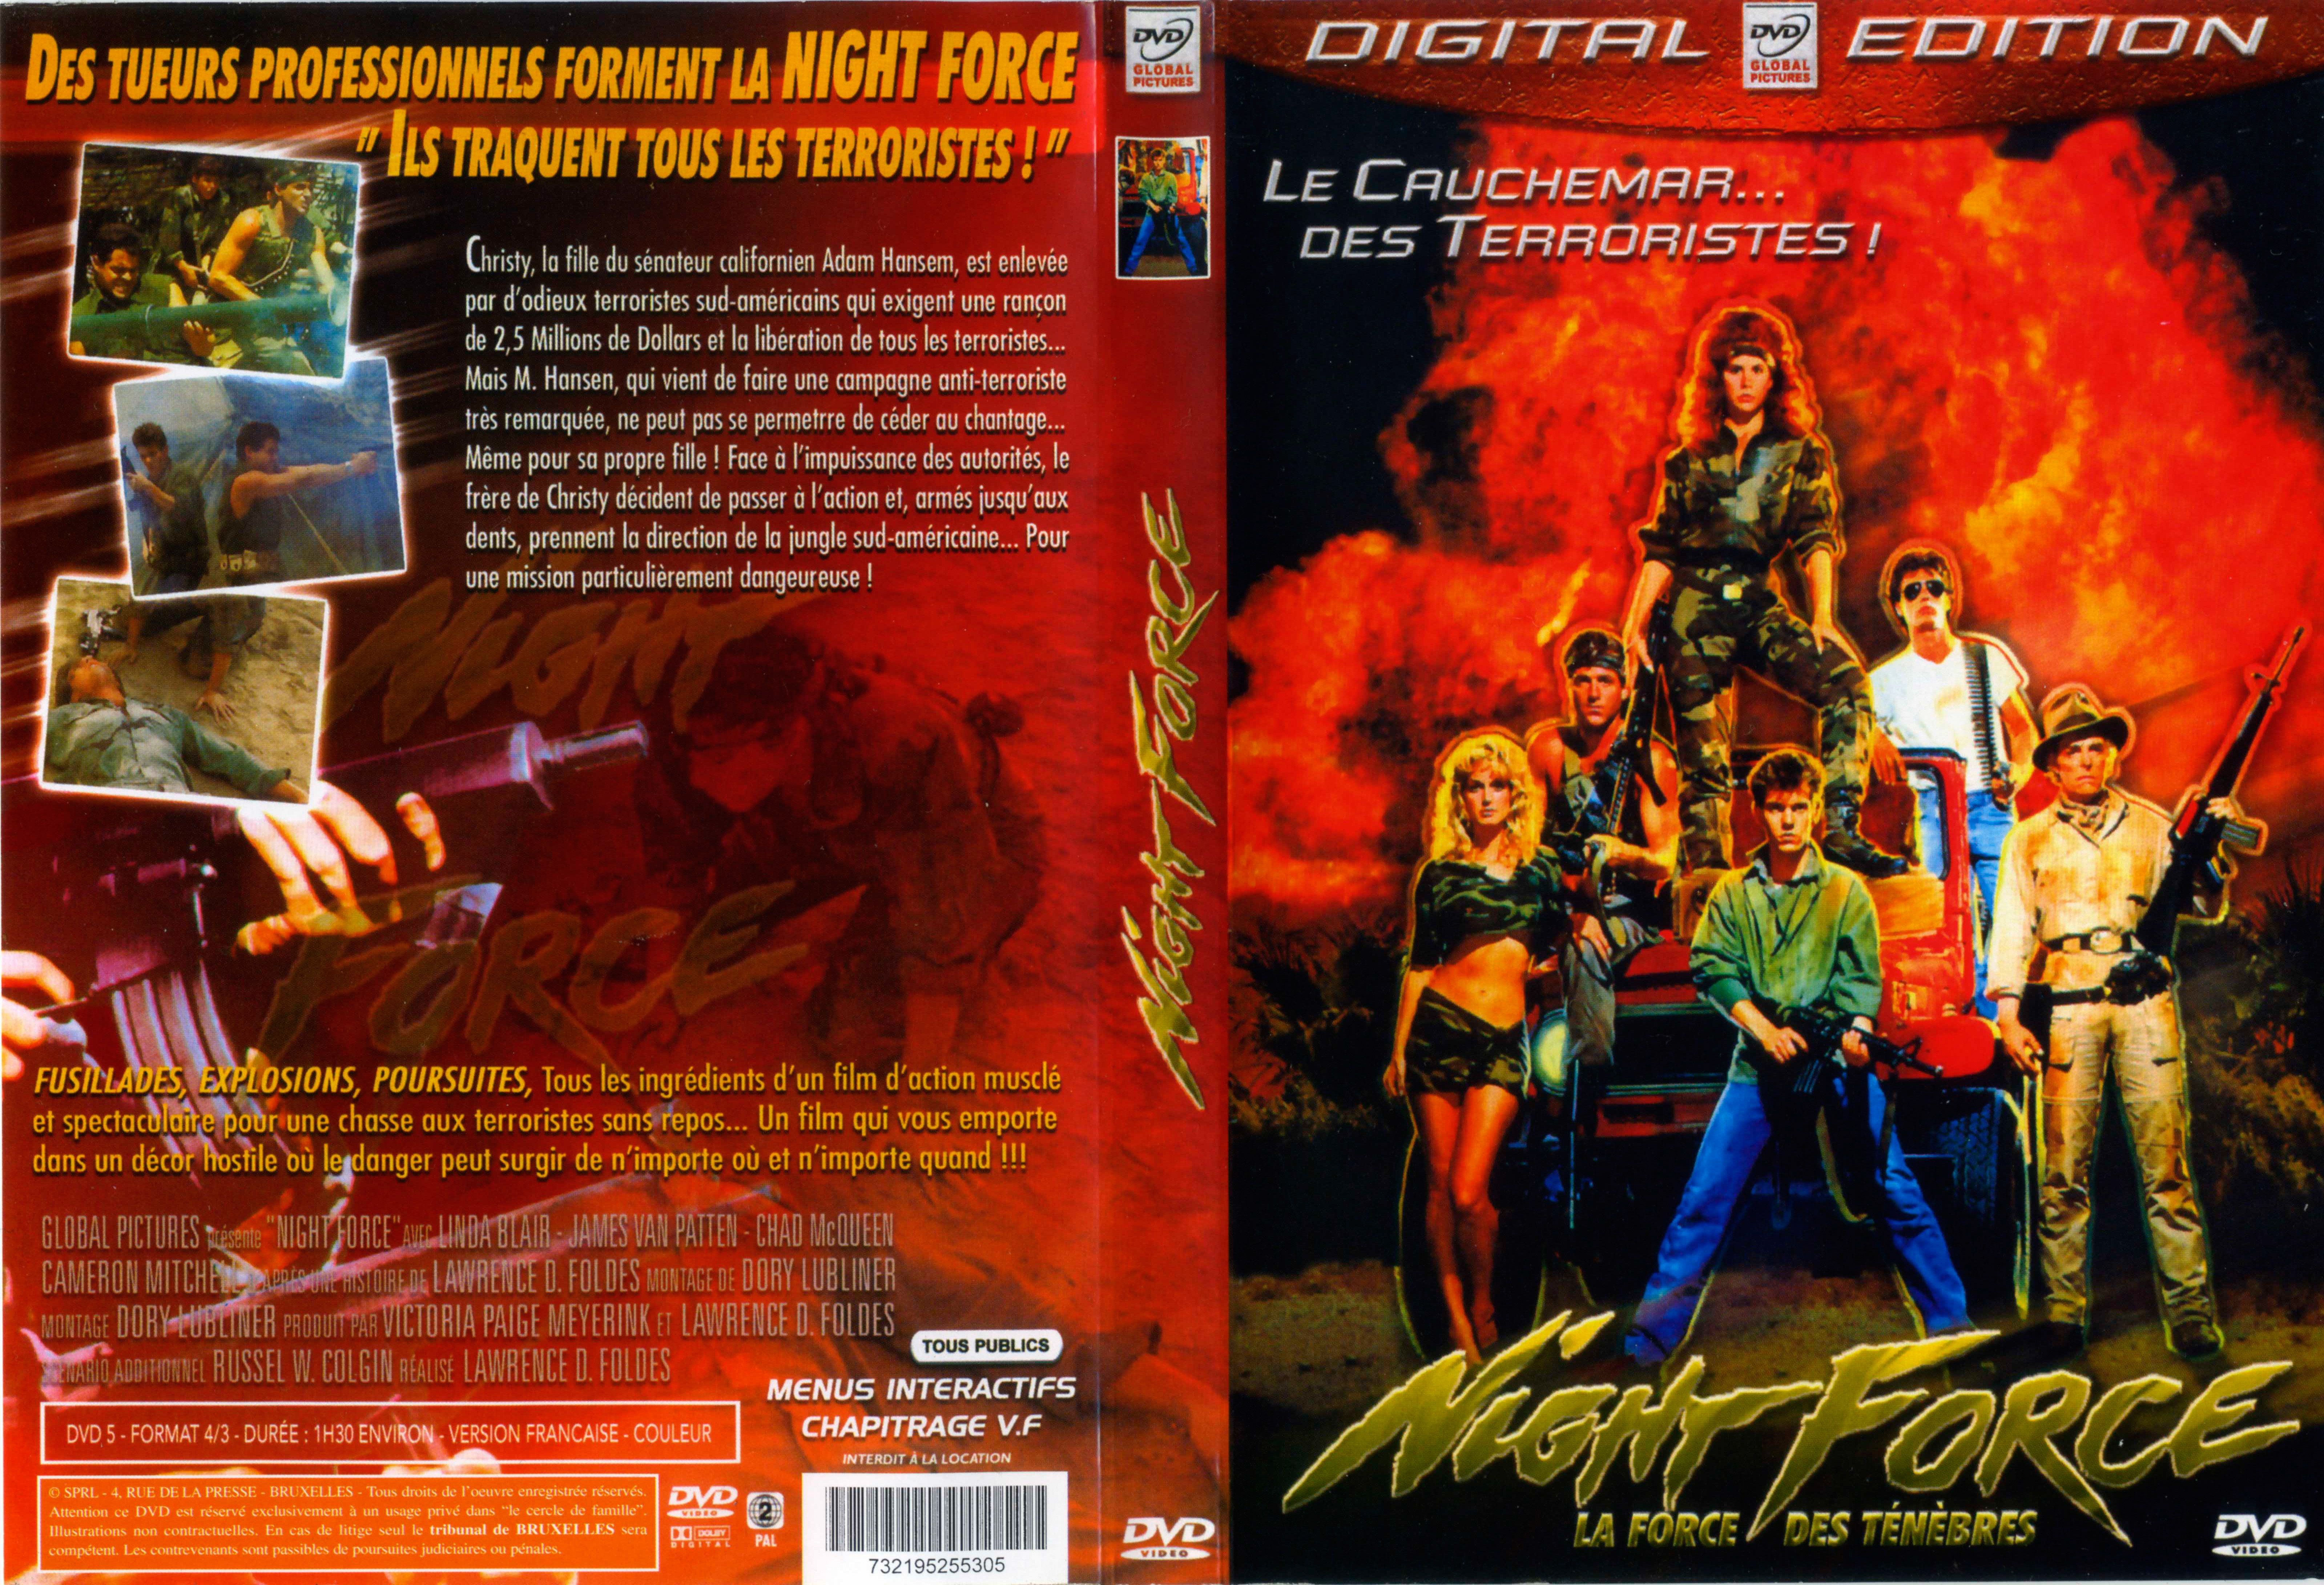 Jaquette DVD Night force